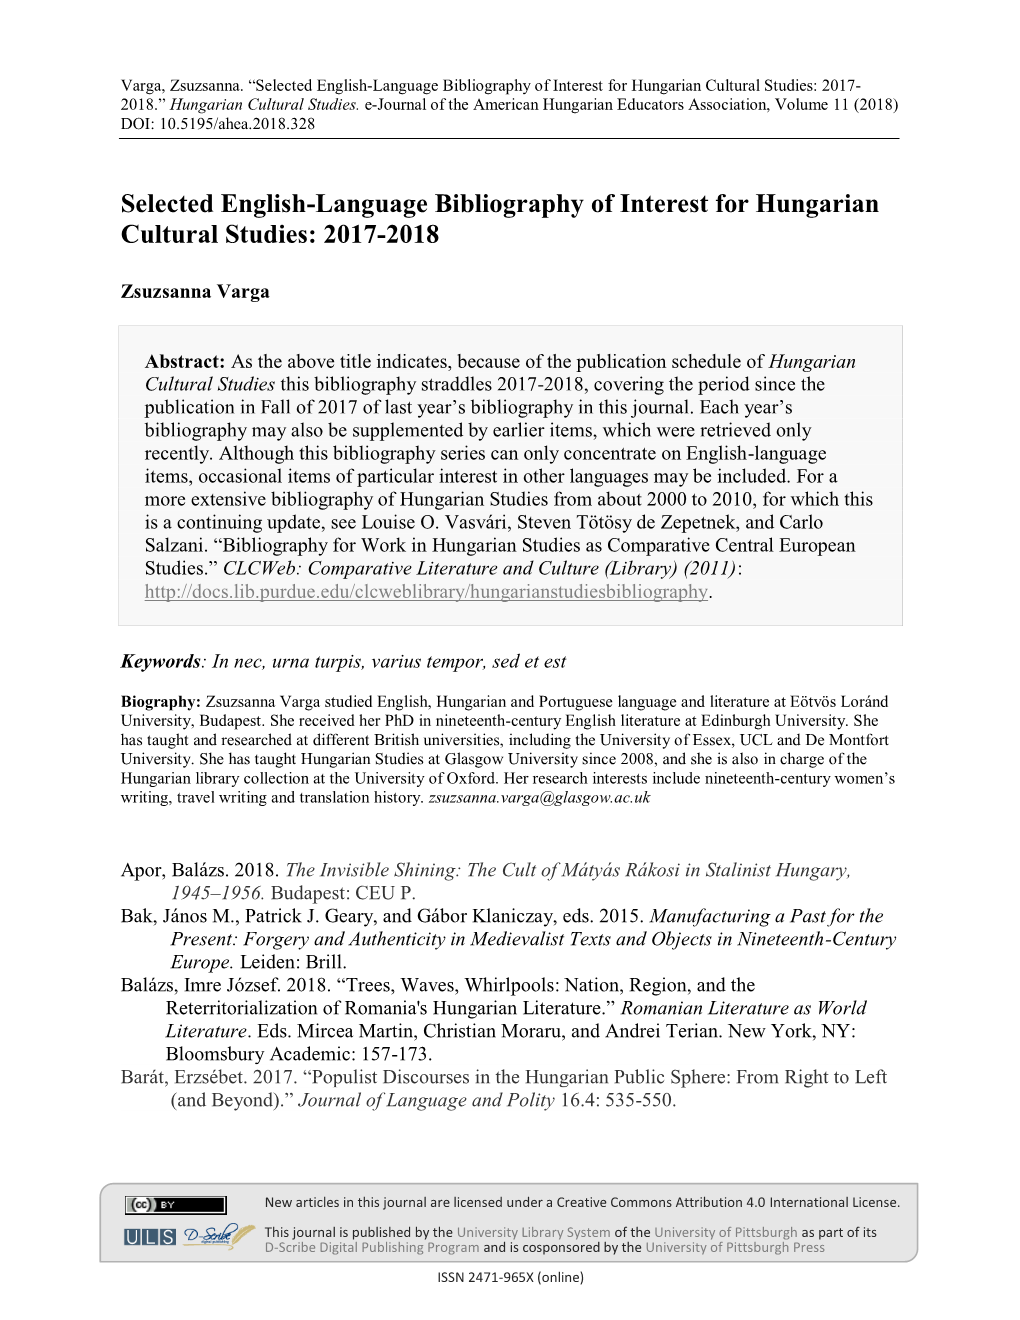 Selected English-Language Bibliography of Interest for Hungarian Cultural Studies: 2017- 2018.” Hungarian Cultural Studies